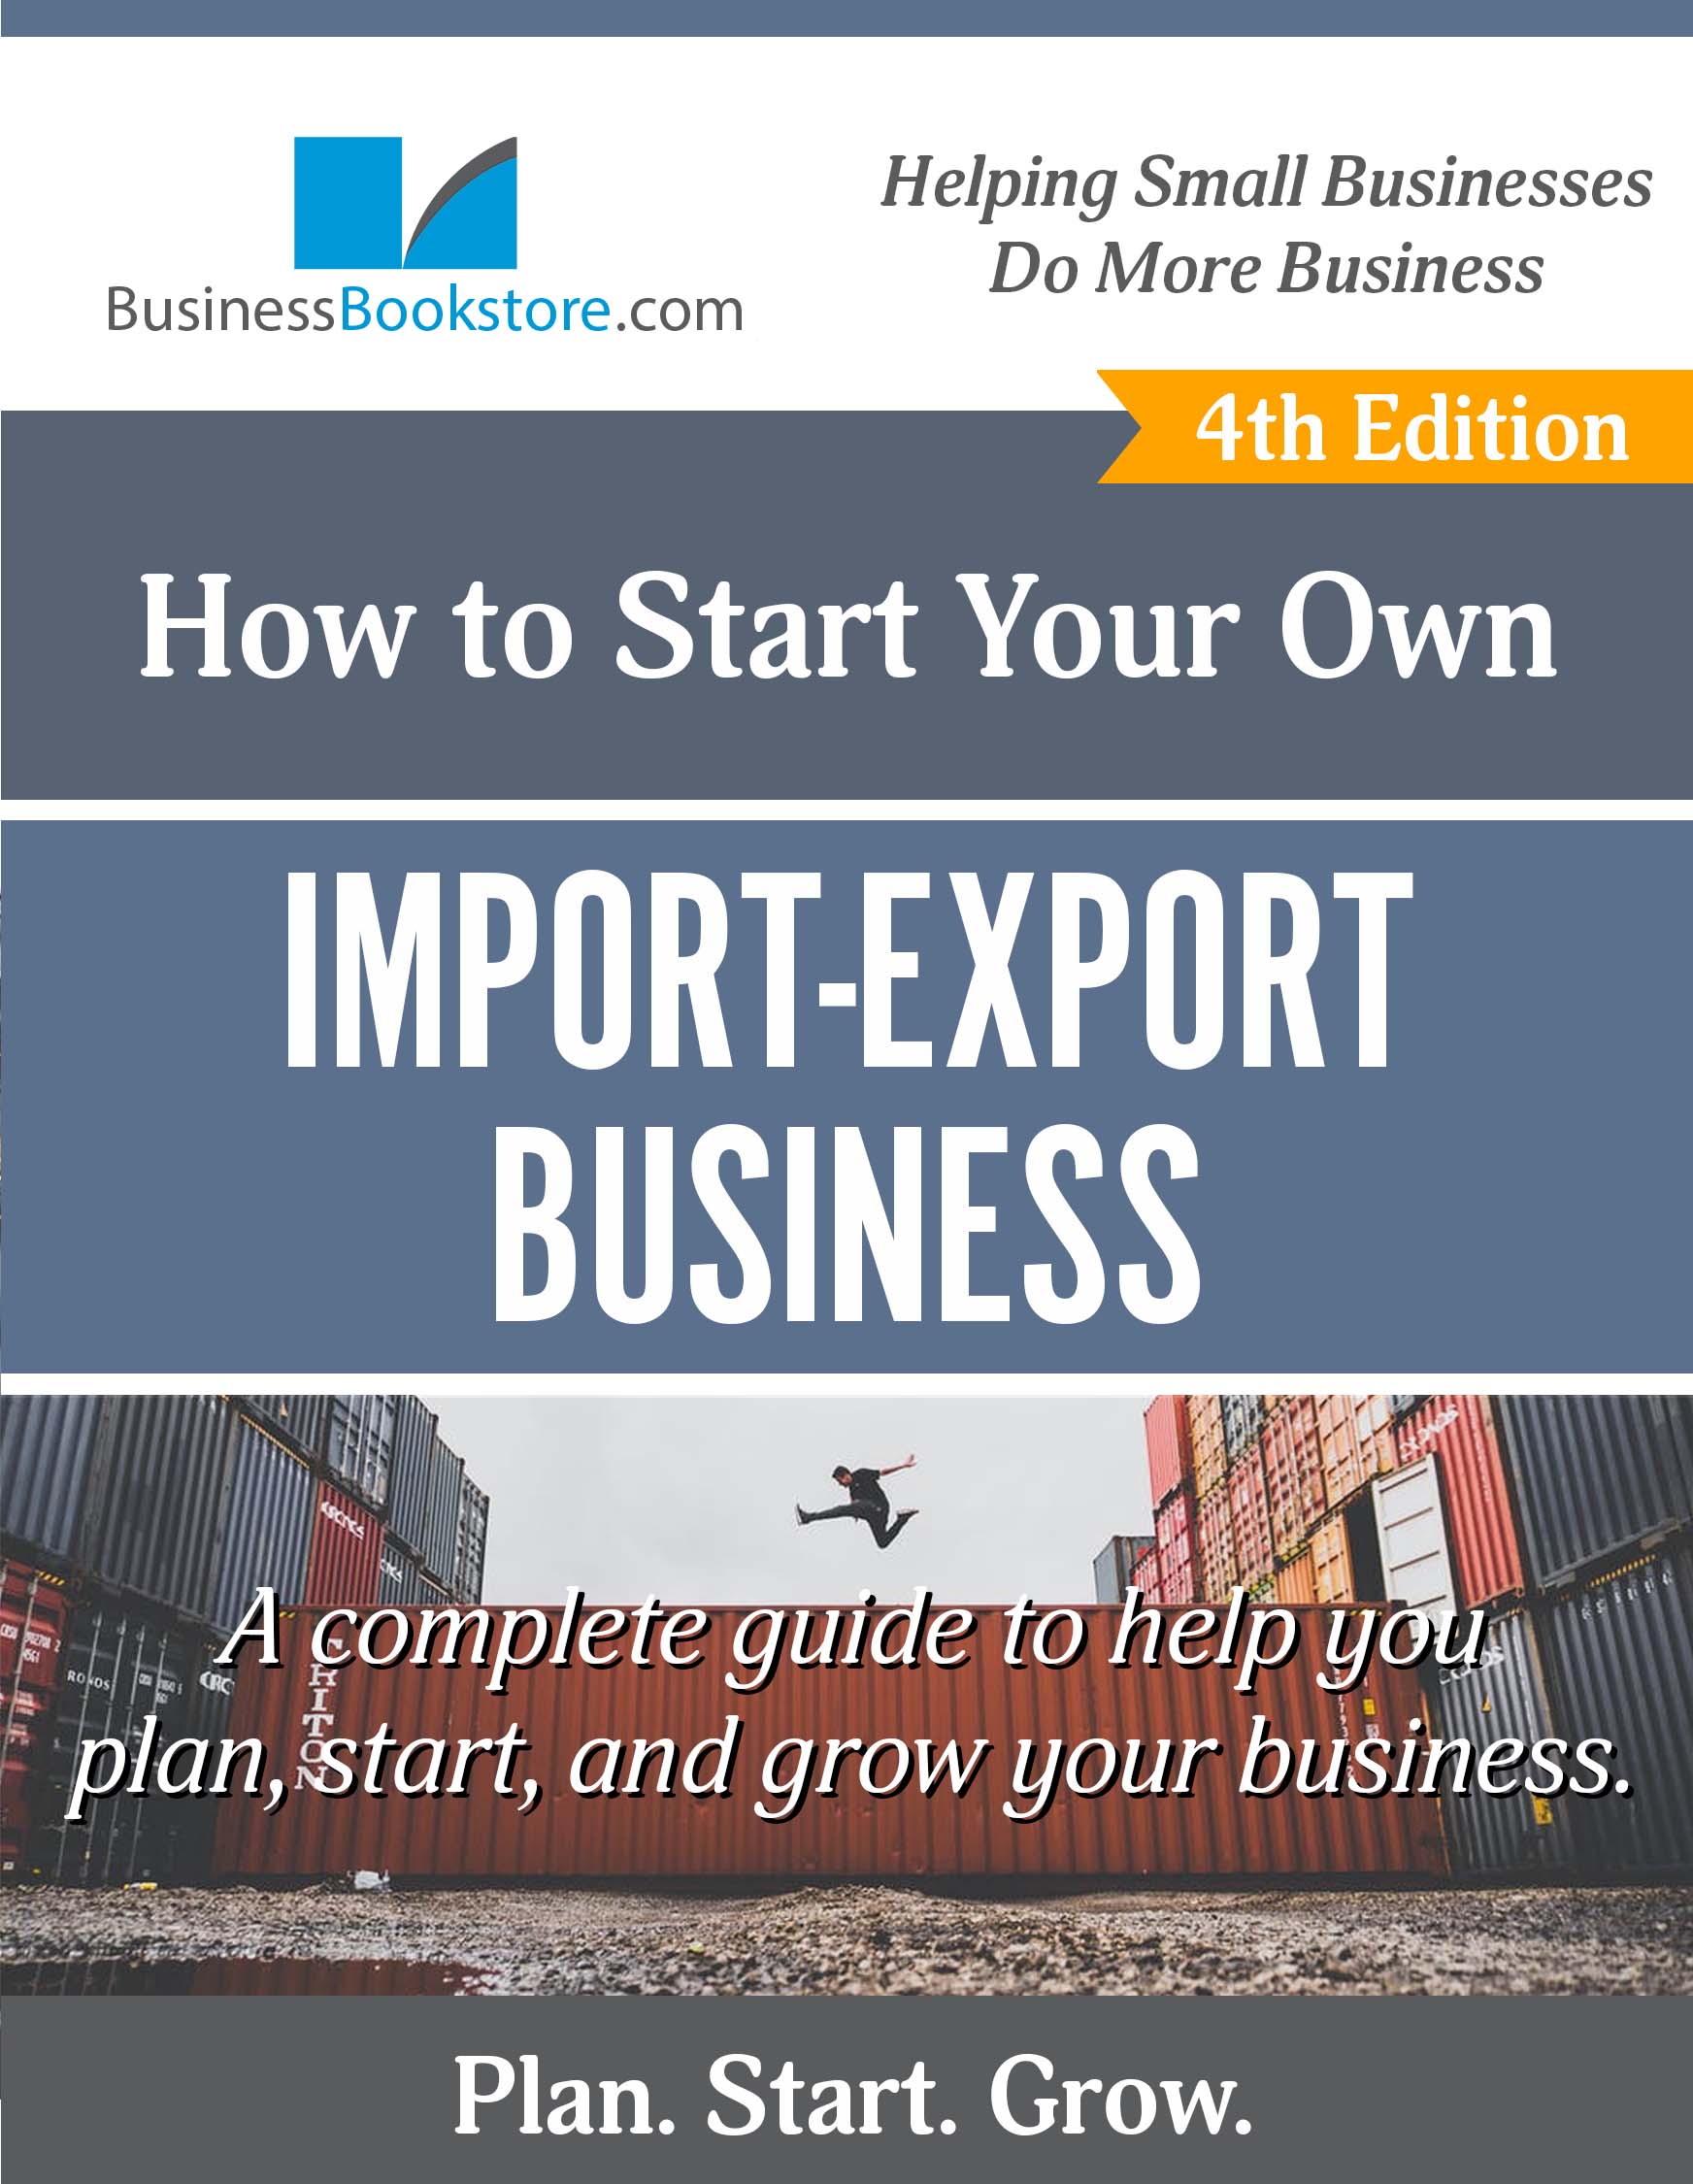 How to Start an Import/Export Business